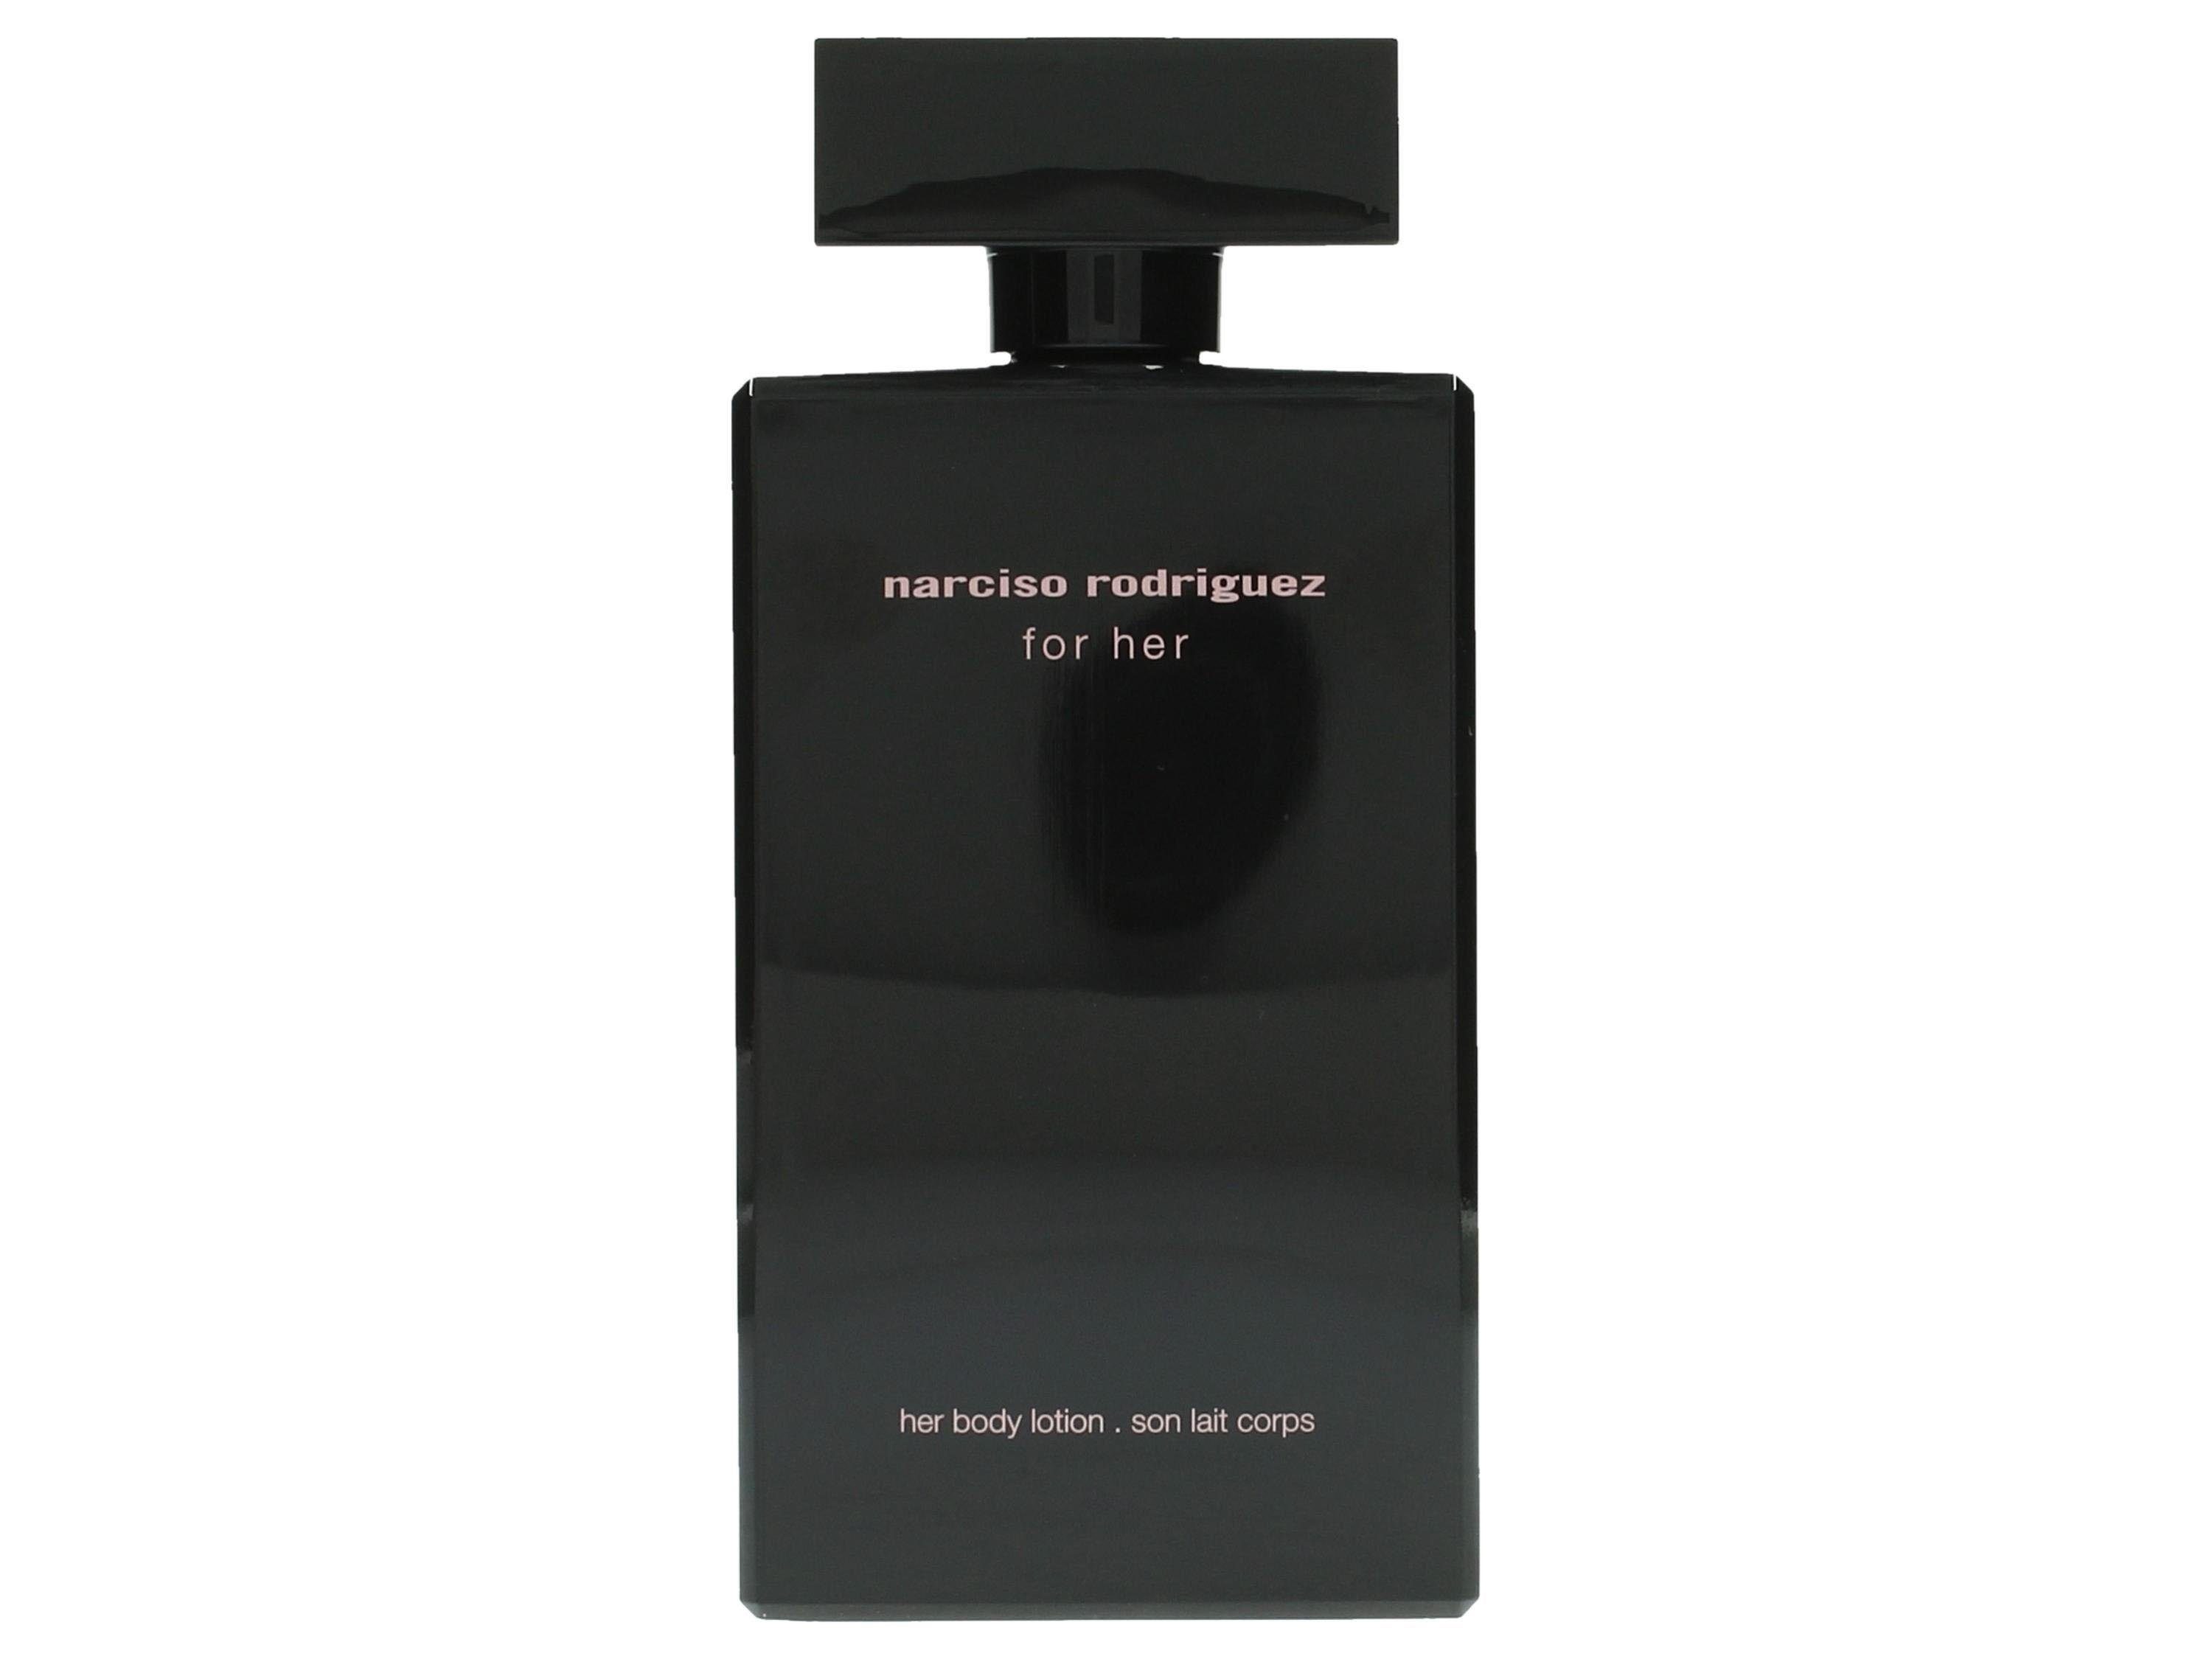 For narciso rodriguez Bodylotion Her